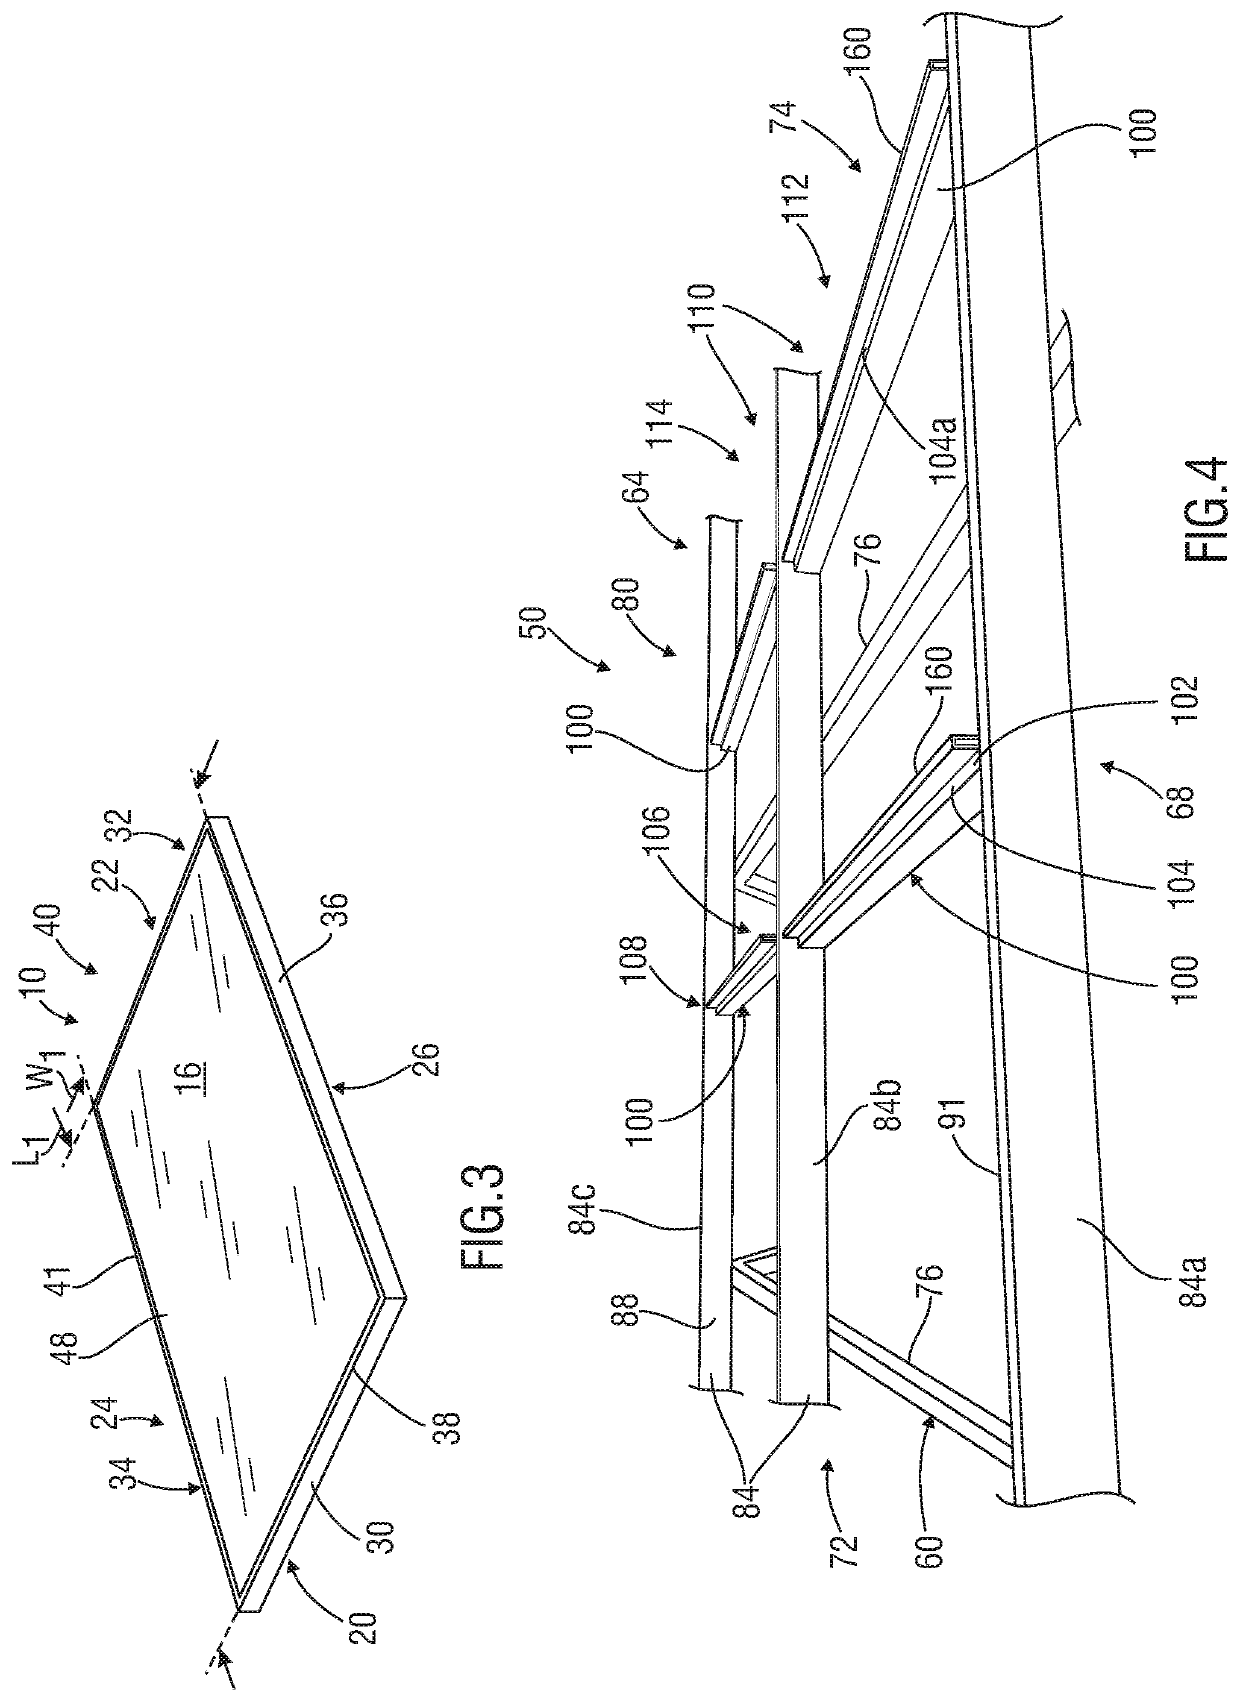 Systems, apparatus & methods for mounting panels upon, or to form, a pitched roof, wall or other structure